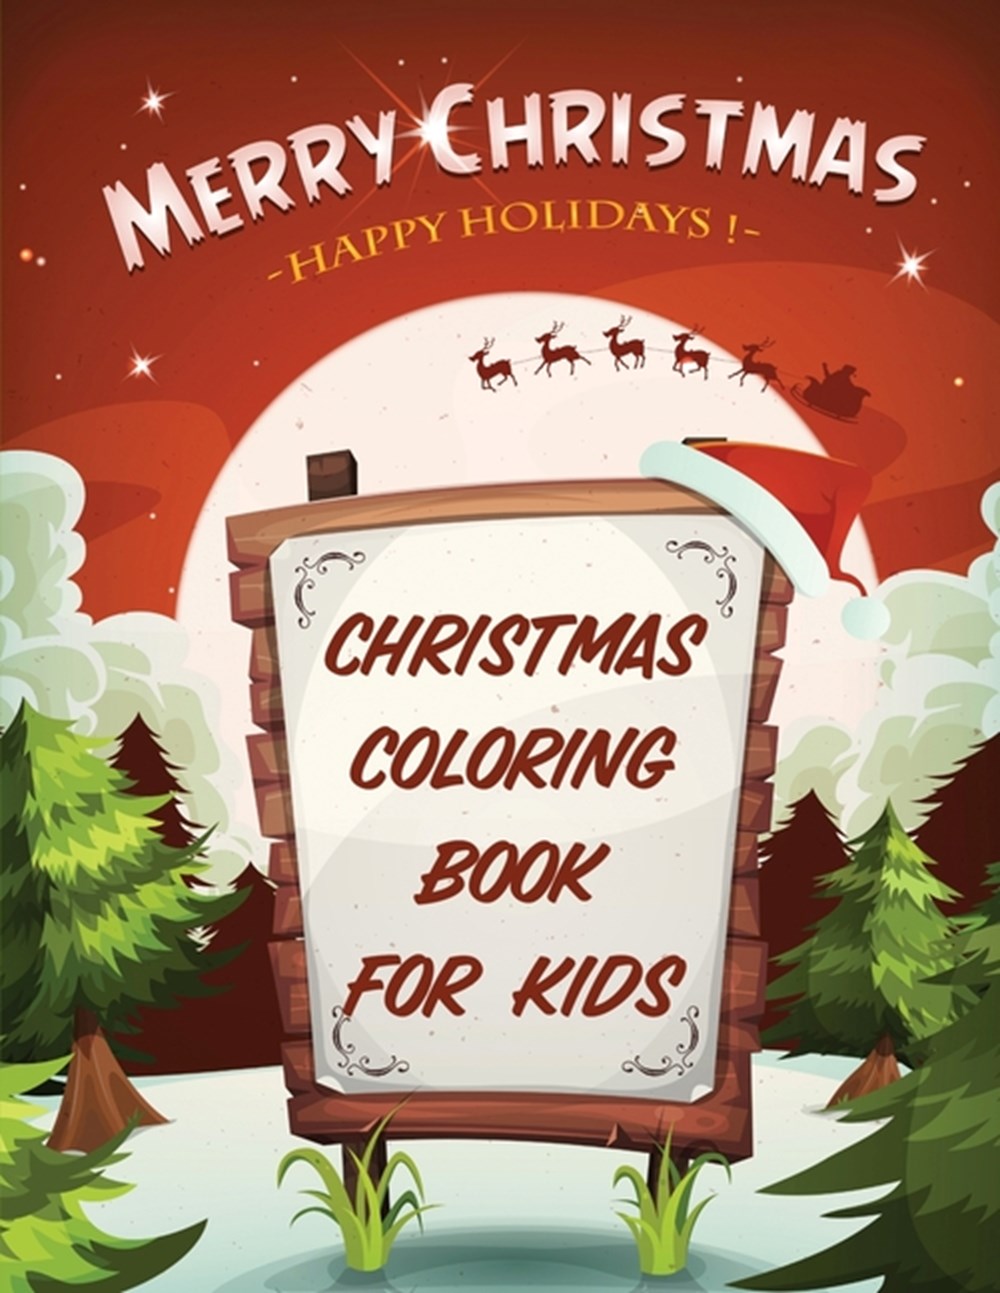 Merry Christmas Happy Holidays Christmas Coloring Book For Kids: Holiday Celebration Crafts and Game